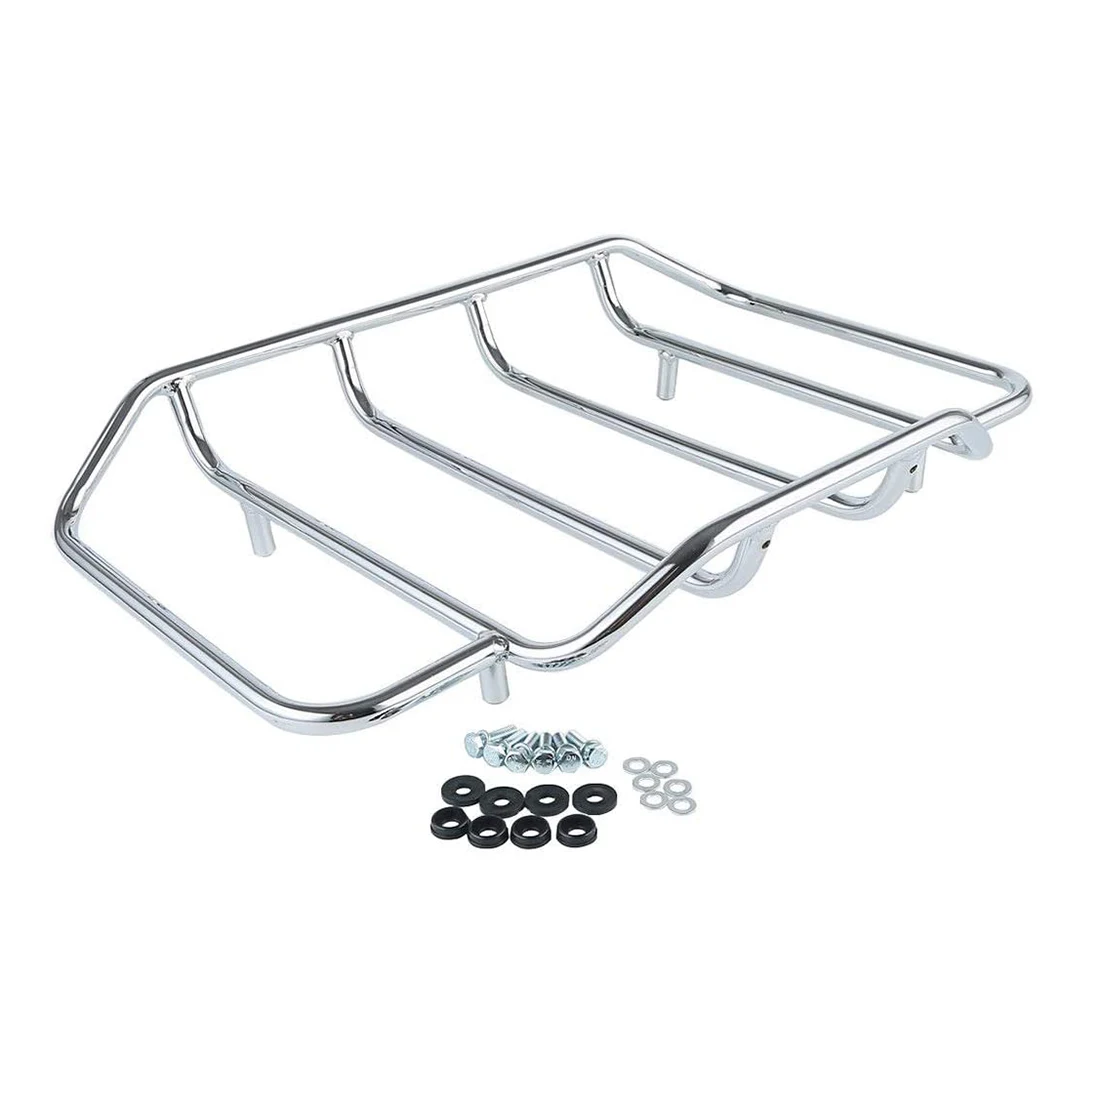 Motorcycles Chrome Luggage Rack Rail Tour Pack Carrier Trunk Top Fits for Harley Road King Glide Touring 1984-2020